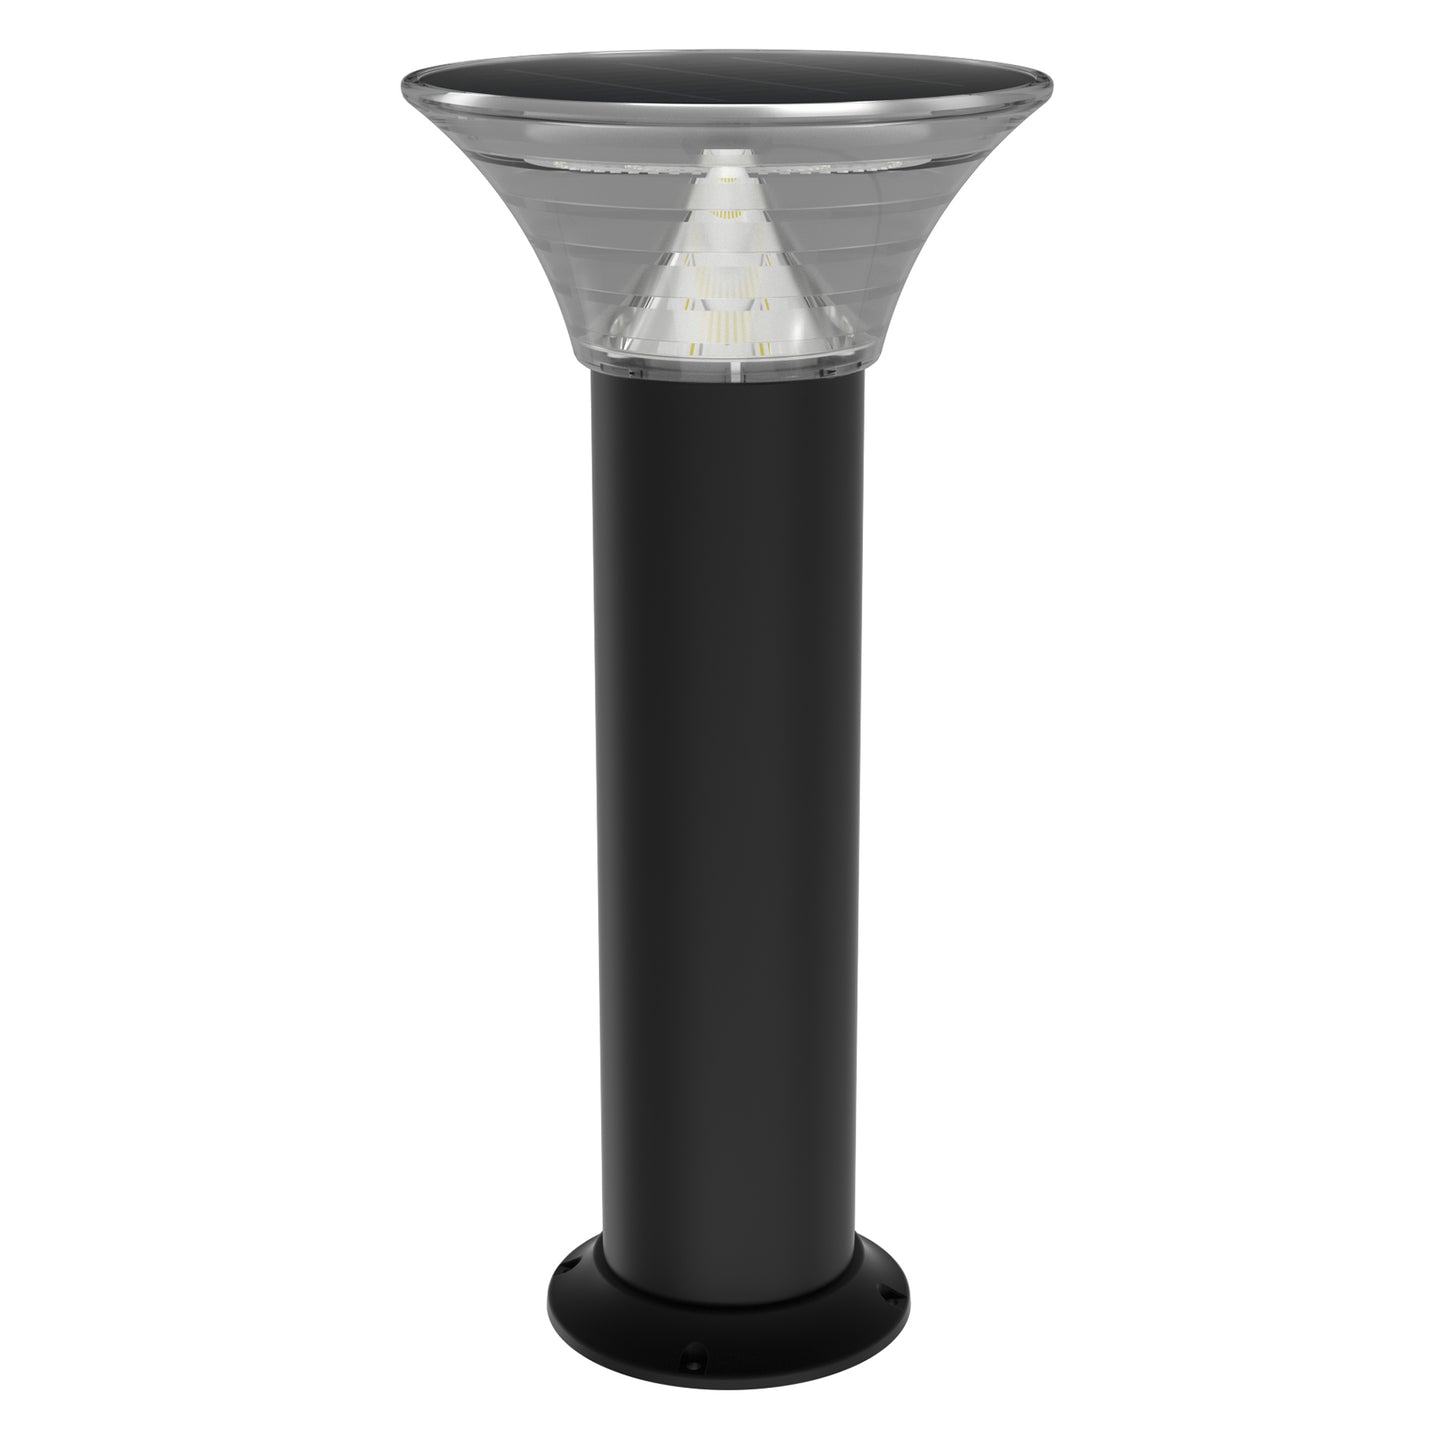 LED Solar Bollard Lights, 1.5W, 220LM, CCT Changeable: Warm White/Cool White, Solar Pathway Lights, IP65 Waterproof, Auto ON/Off, Solar Garden Lights Outdoor